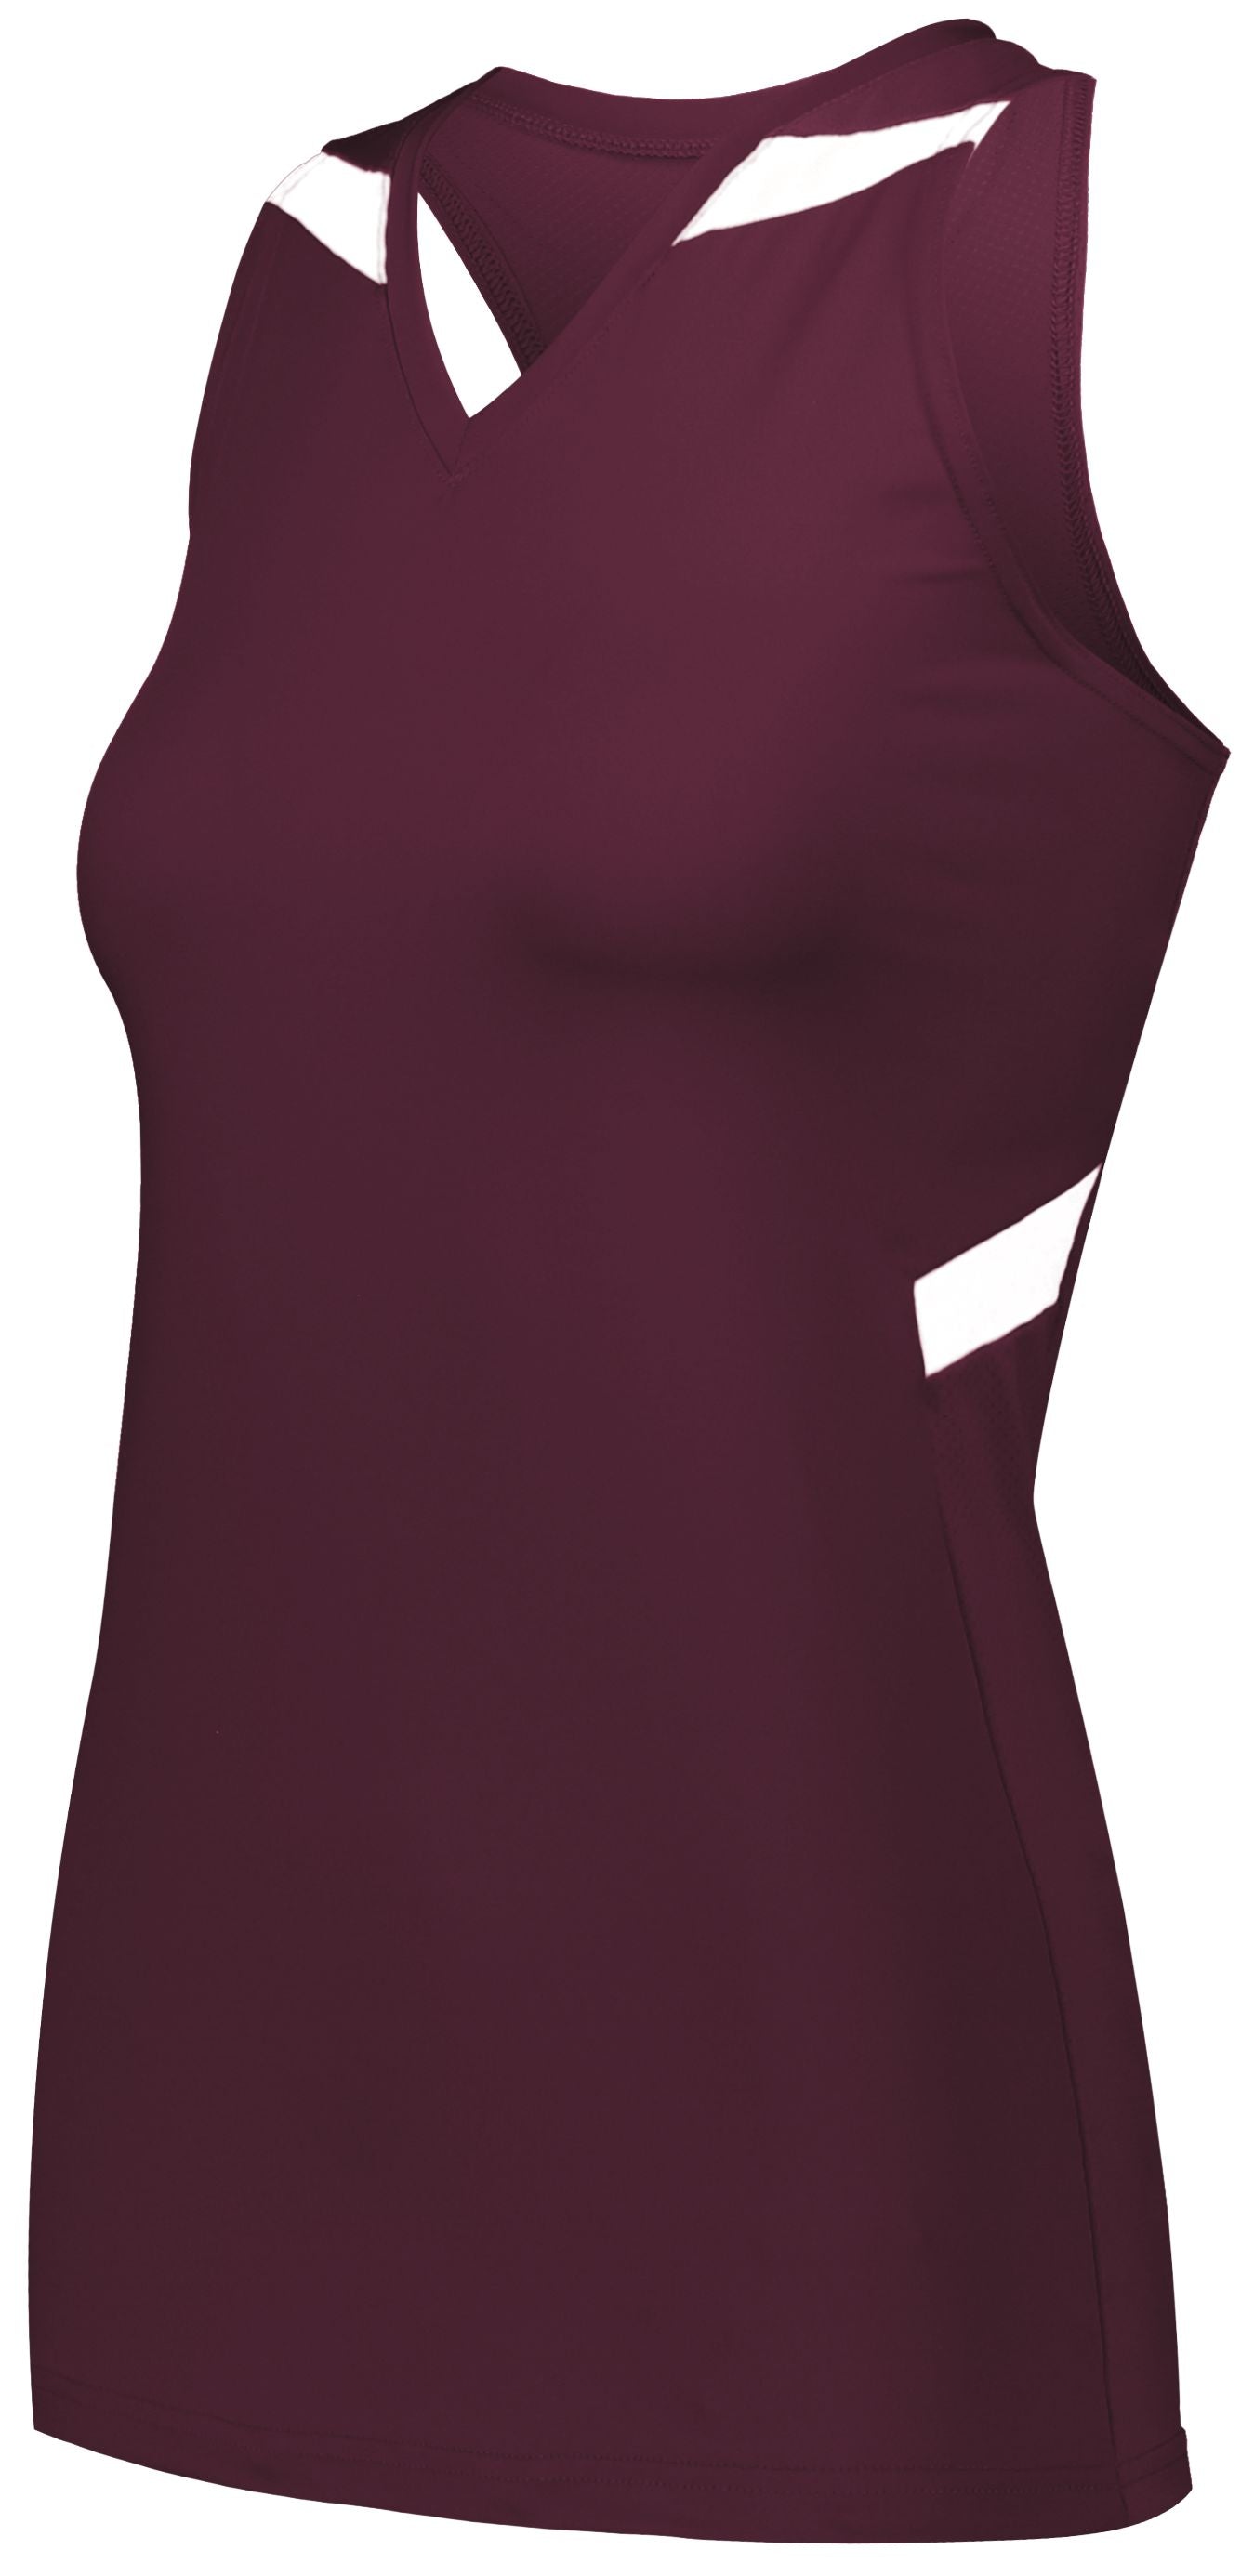 Holloway Ladies Pr Max Compression Jersey in Maroon/White  -Part of the Ladies, Ladies-Jersey, Track-Field, Holloway, Shirts product lines at KanaleyCreations.com